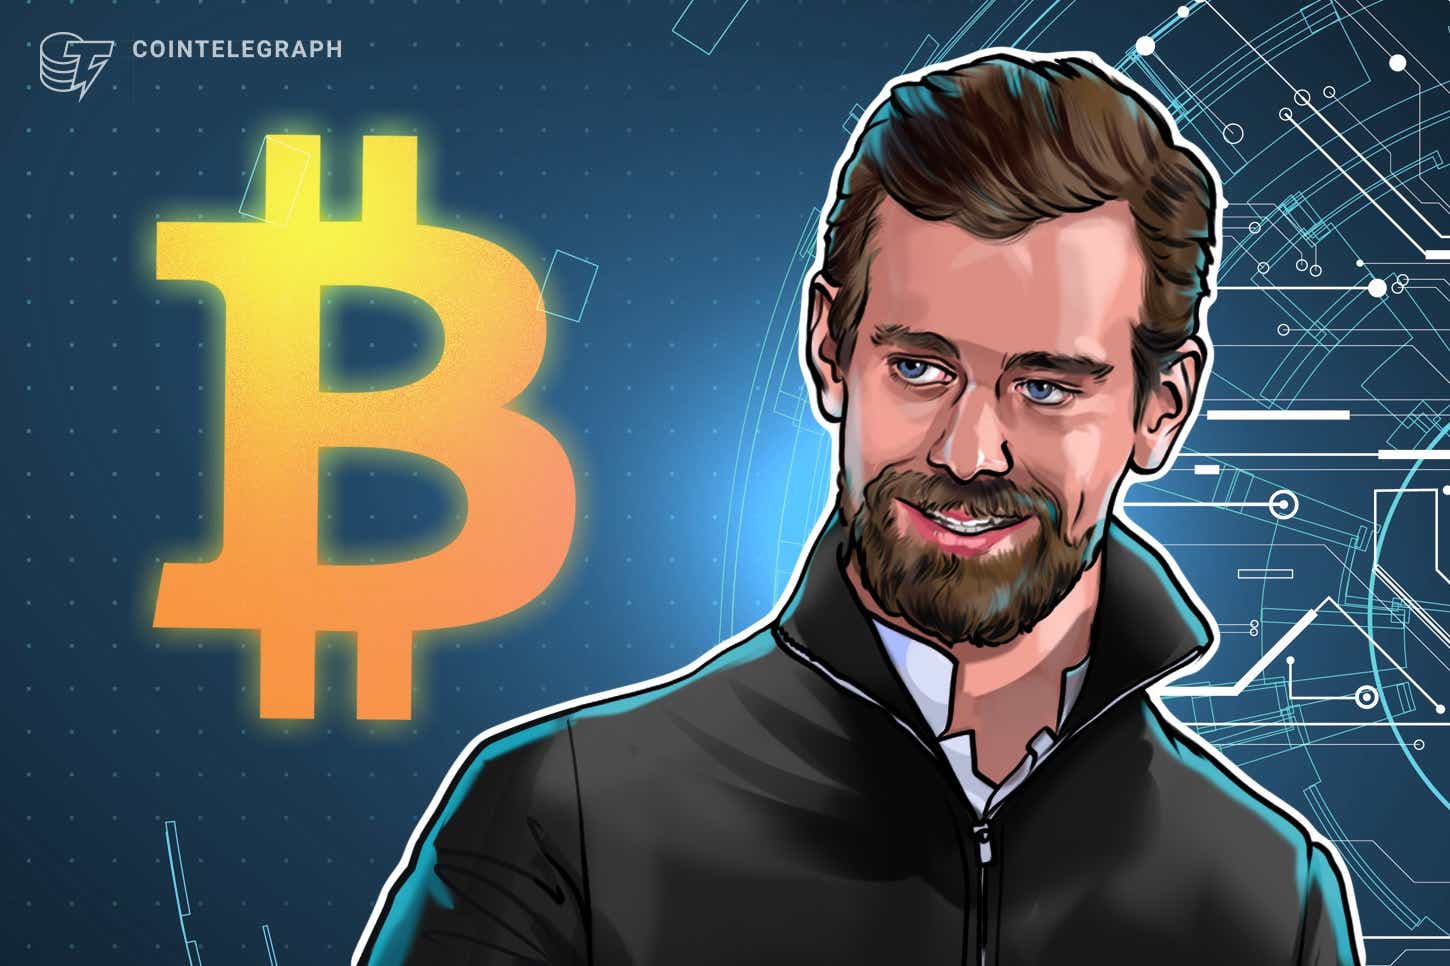 Twitter-ceo-jack-dorsey-reiterates-a-positive-outlook-on-bitcoin-tipping-during-earnings-call